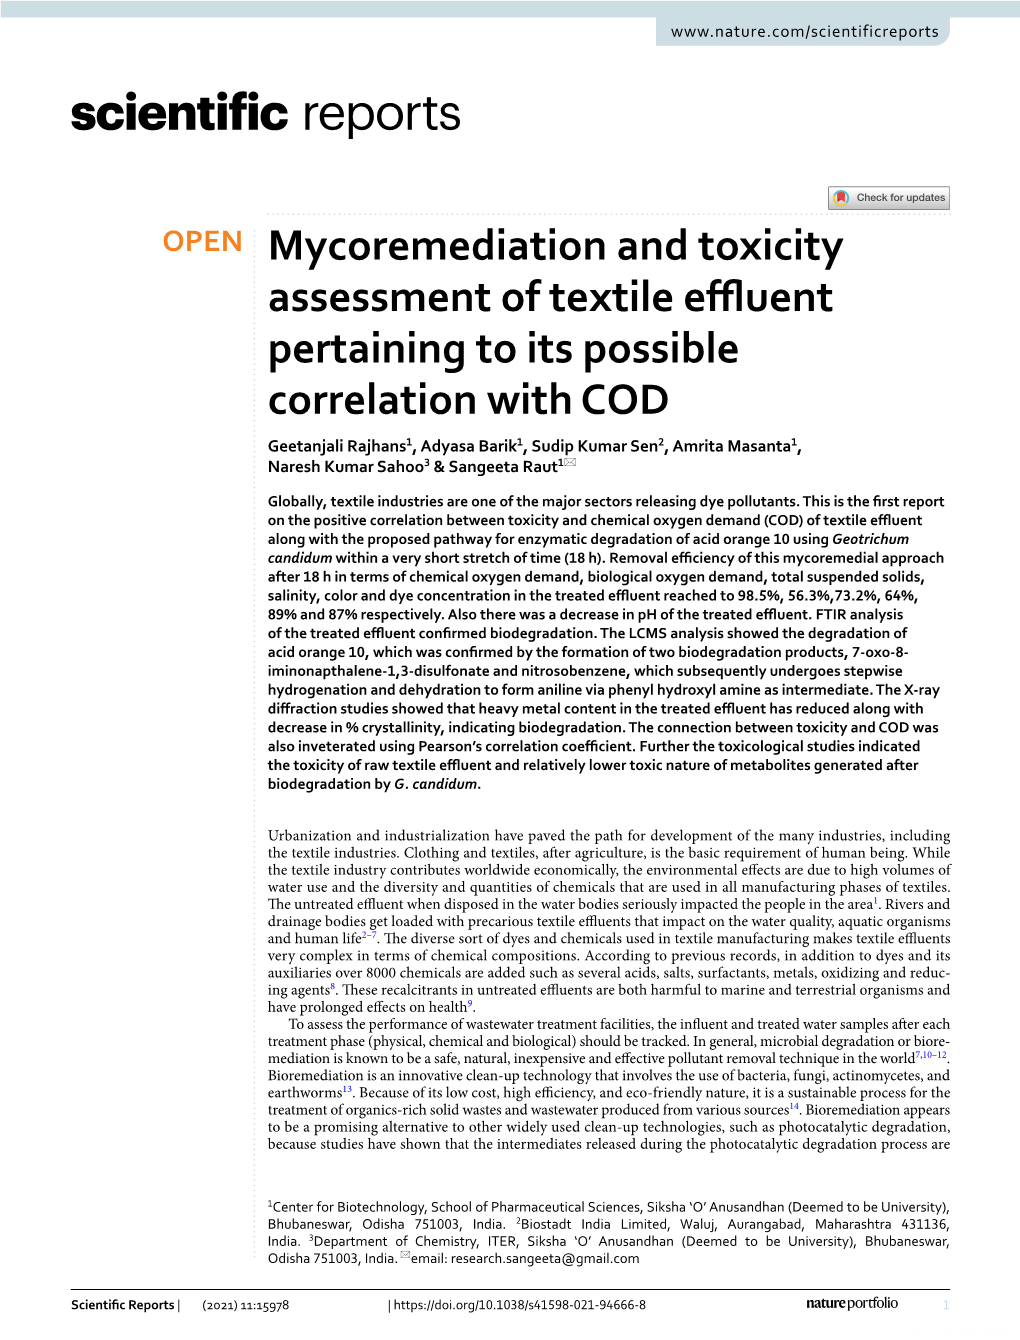 Mycoremediation and Toxicity Assessment of Textile Effluent